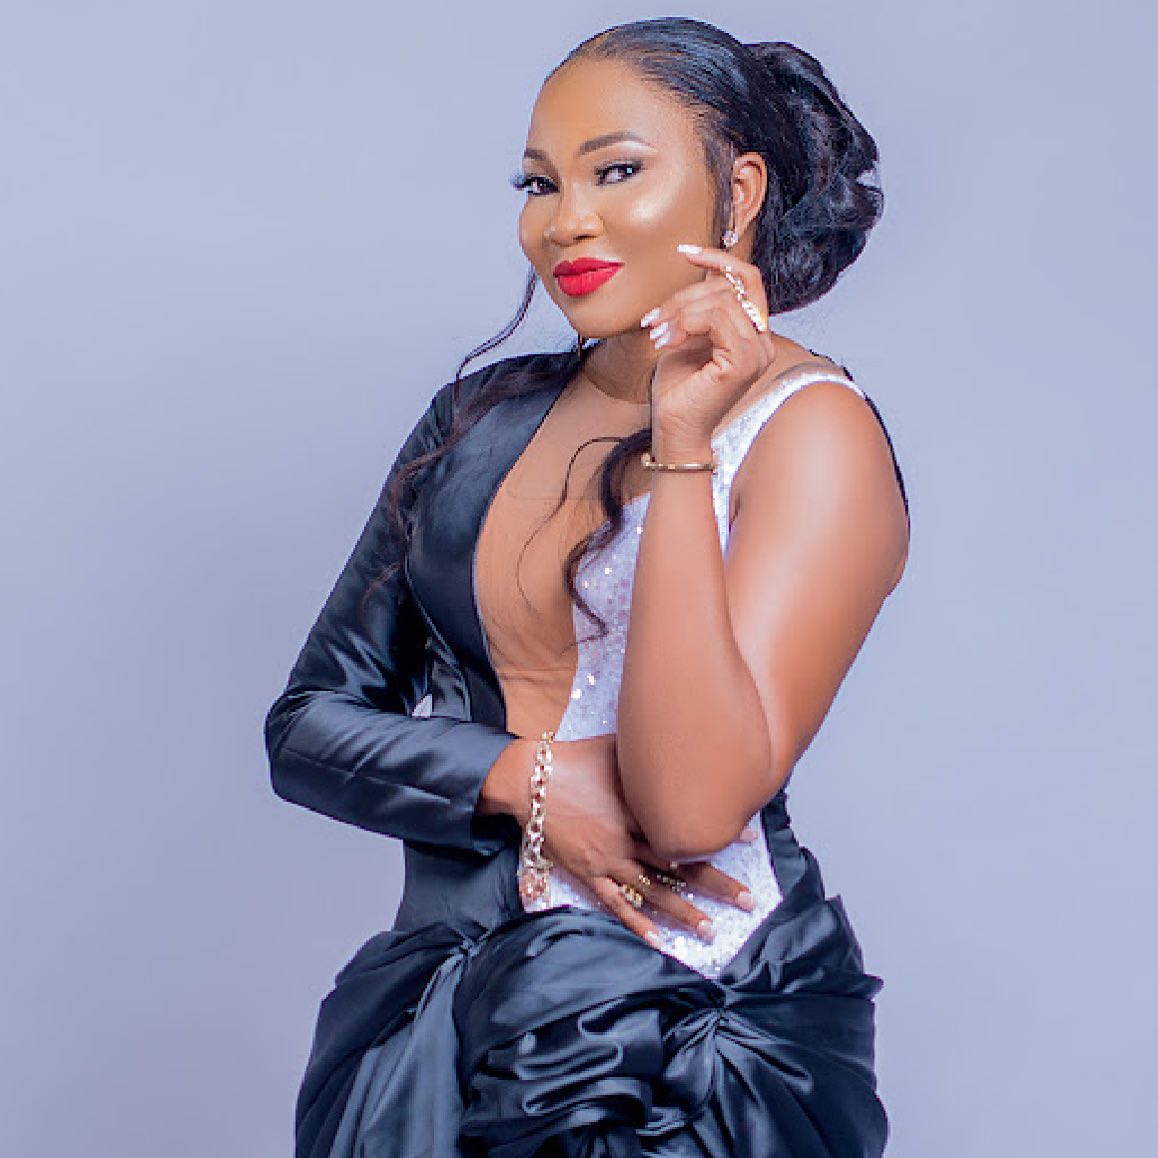 Happy Birthday to Beautiful Actress, JUMOKE ODETOLA as sha shares Lovely Pictures [SEE PHOTOS]